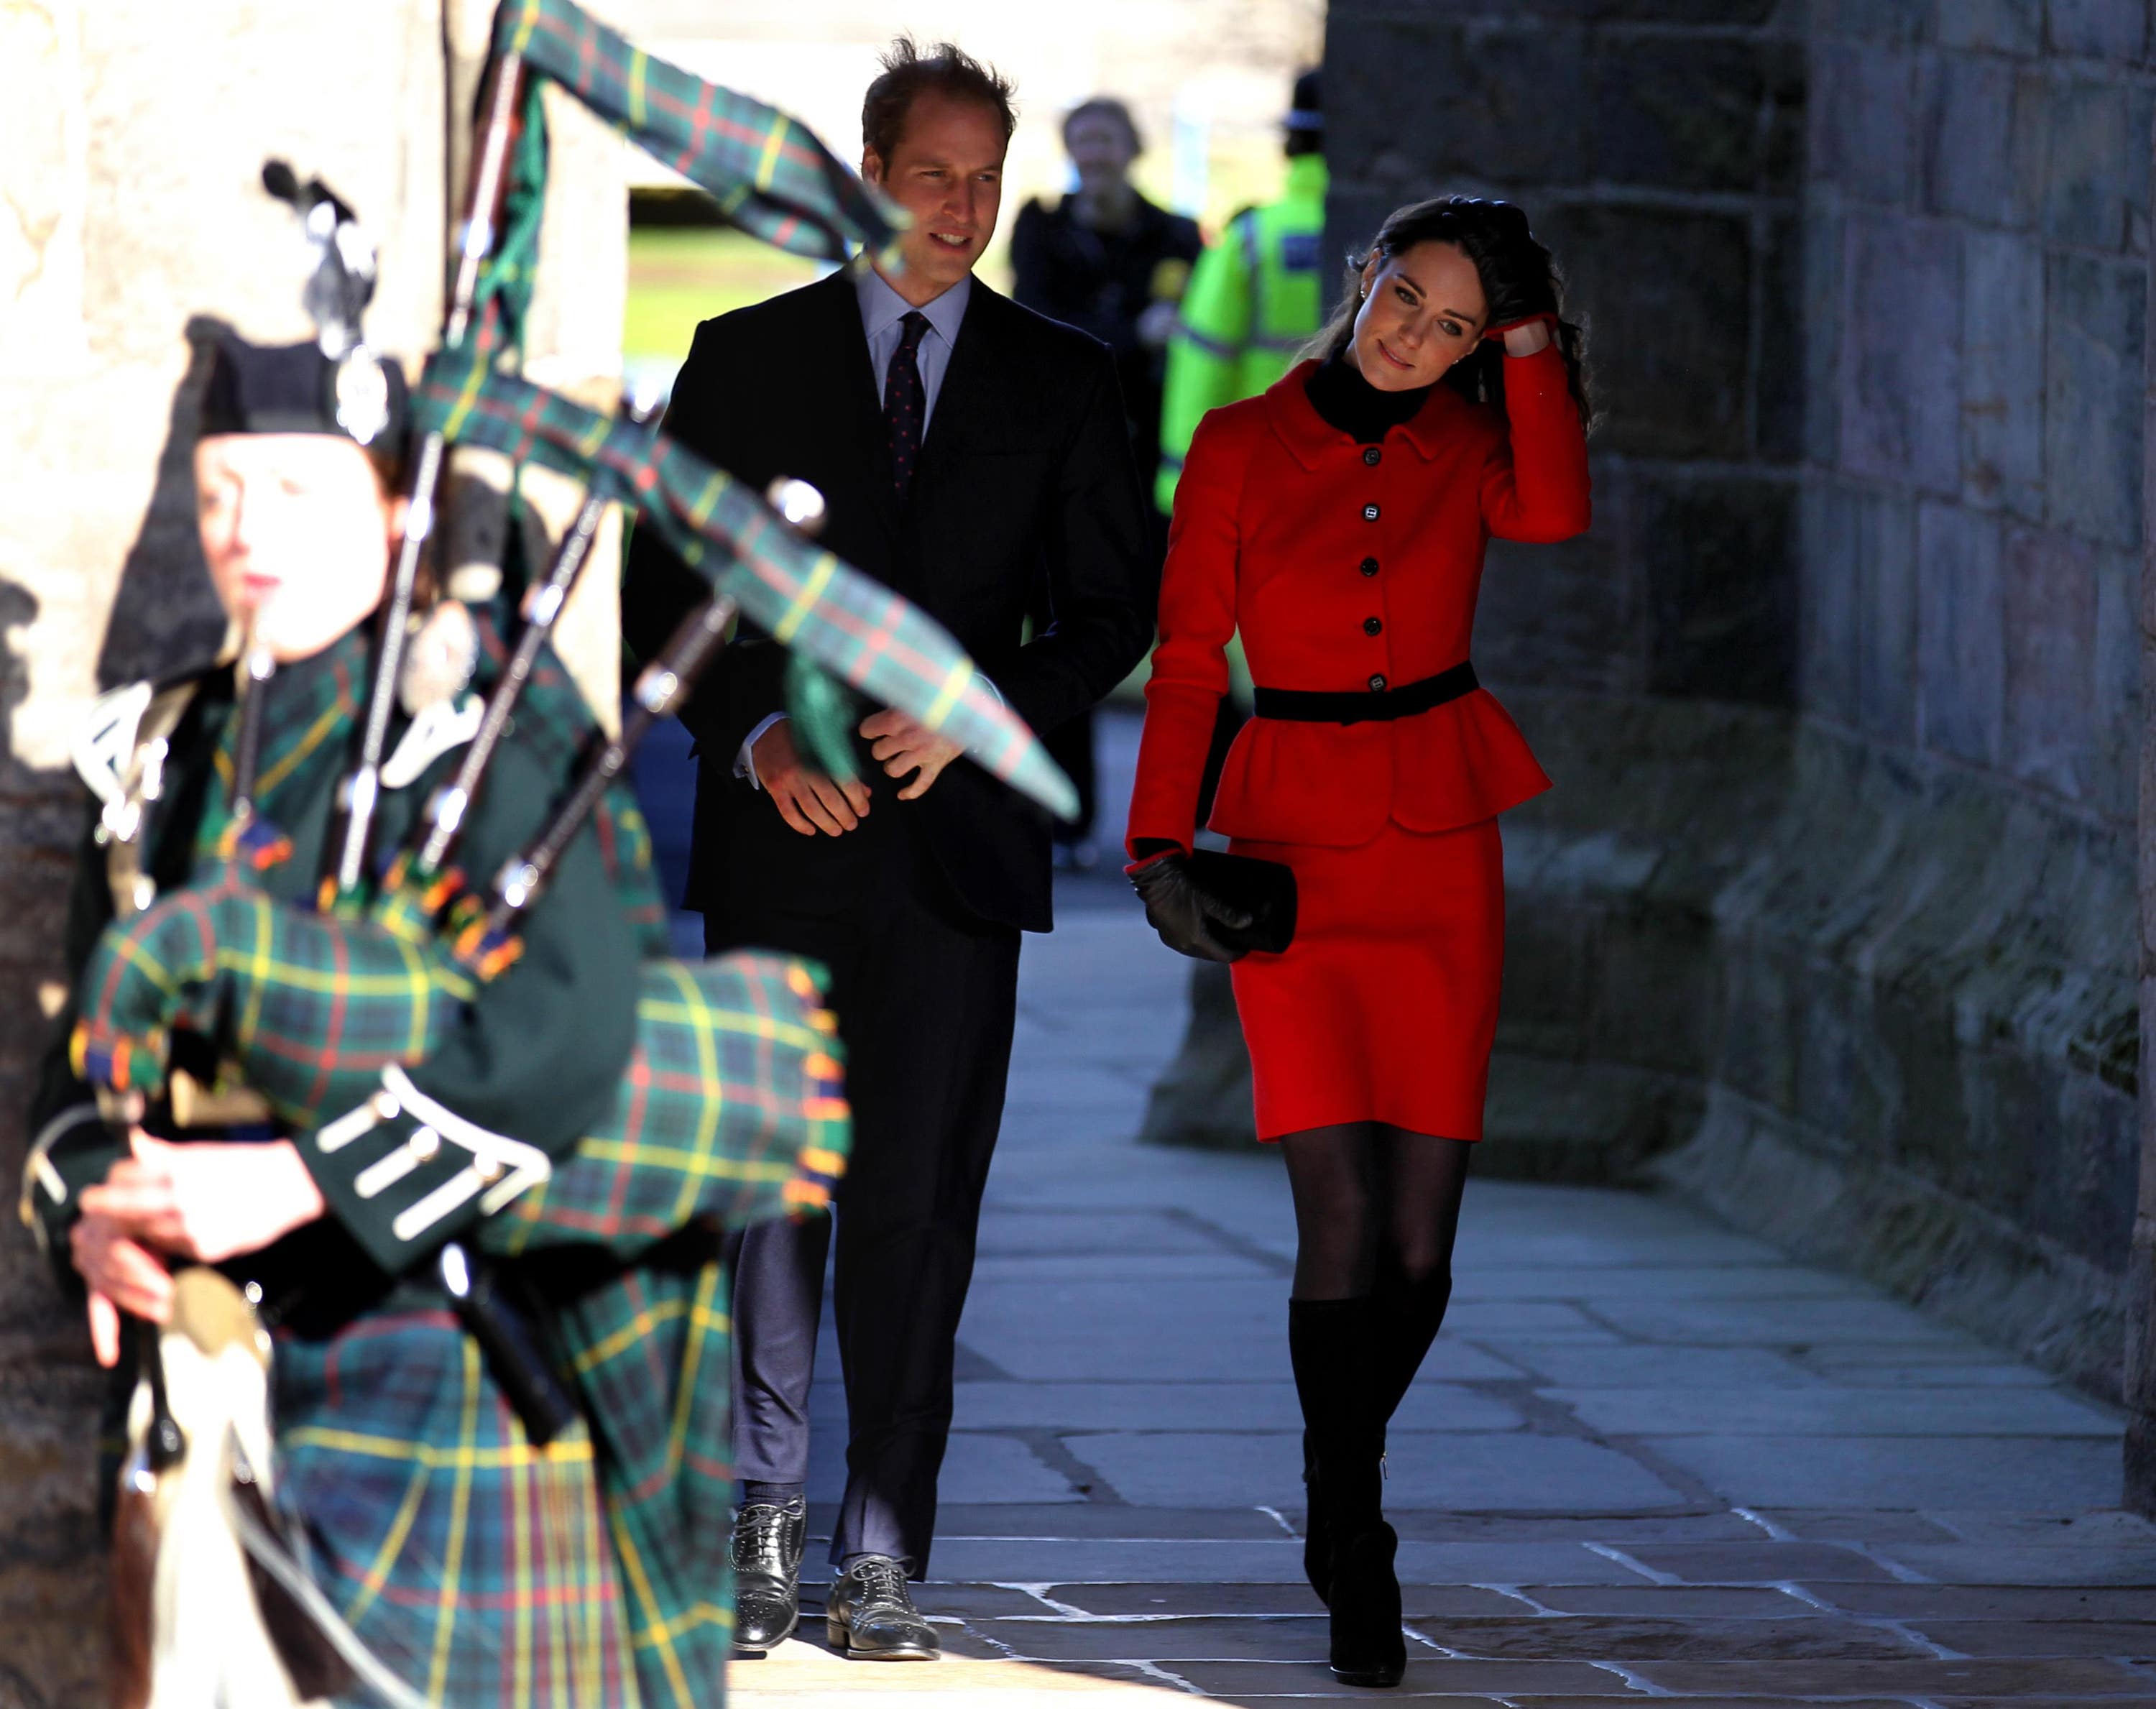 Prince William and Kate Middleton leave the Quadrangle during a return visit to the University of St Andrews in 2011 (Andrew Milligan/PA)